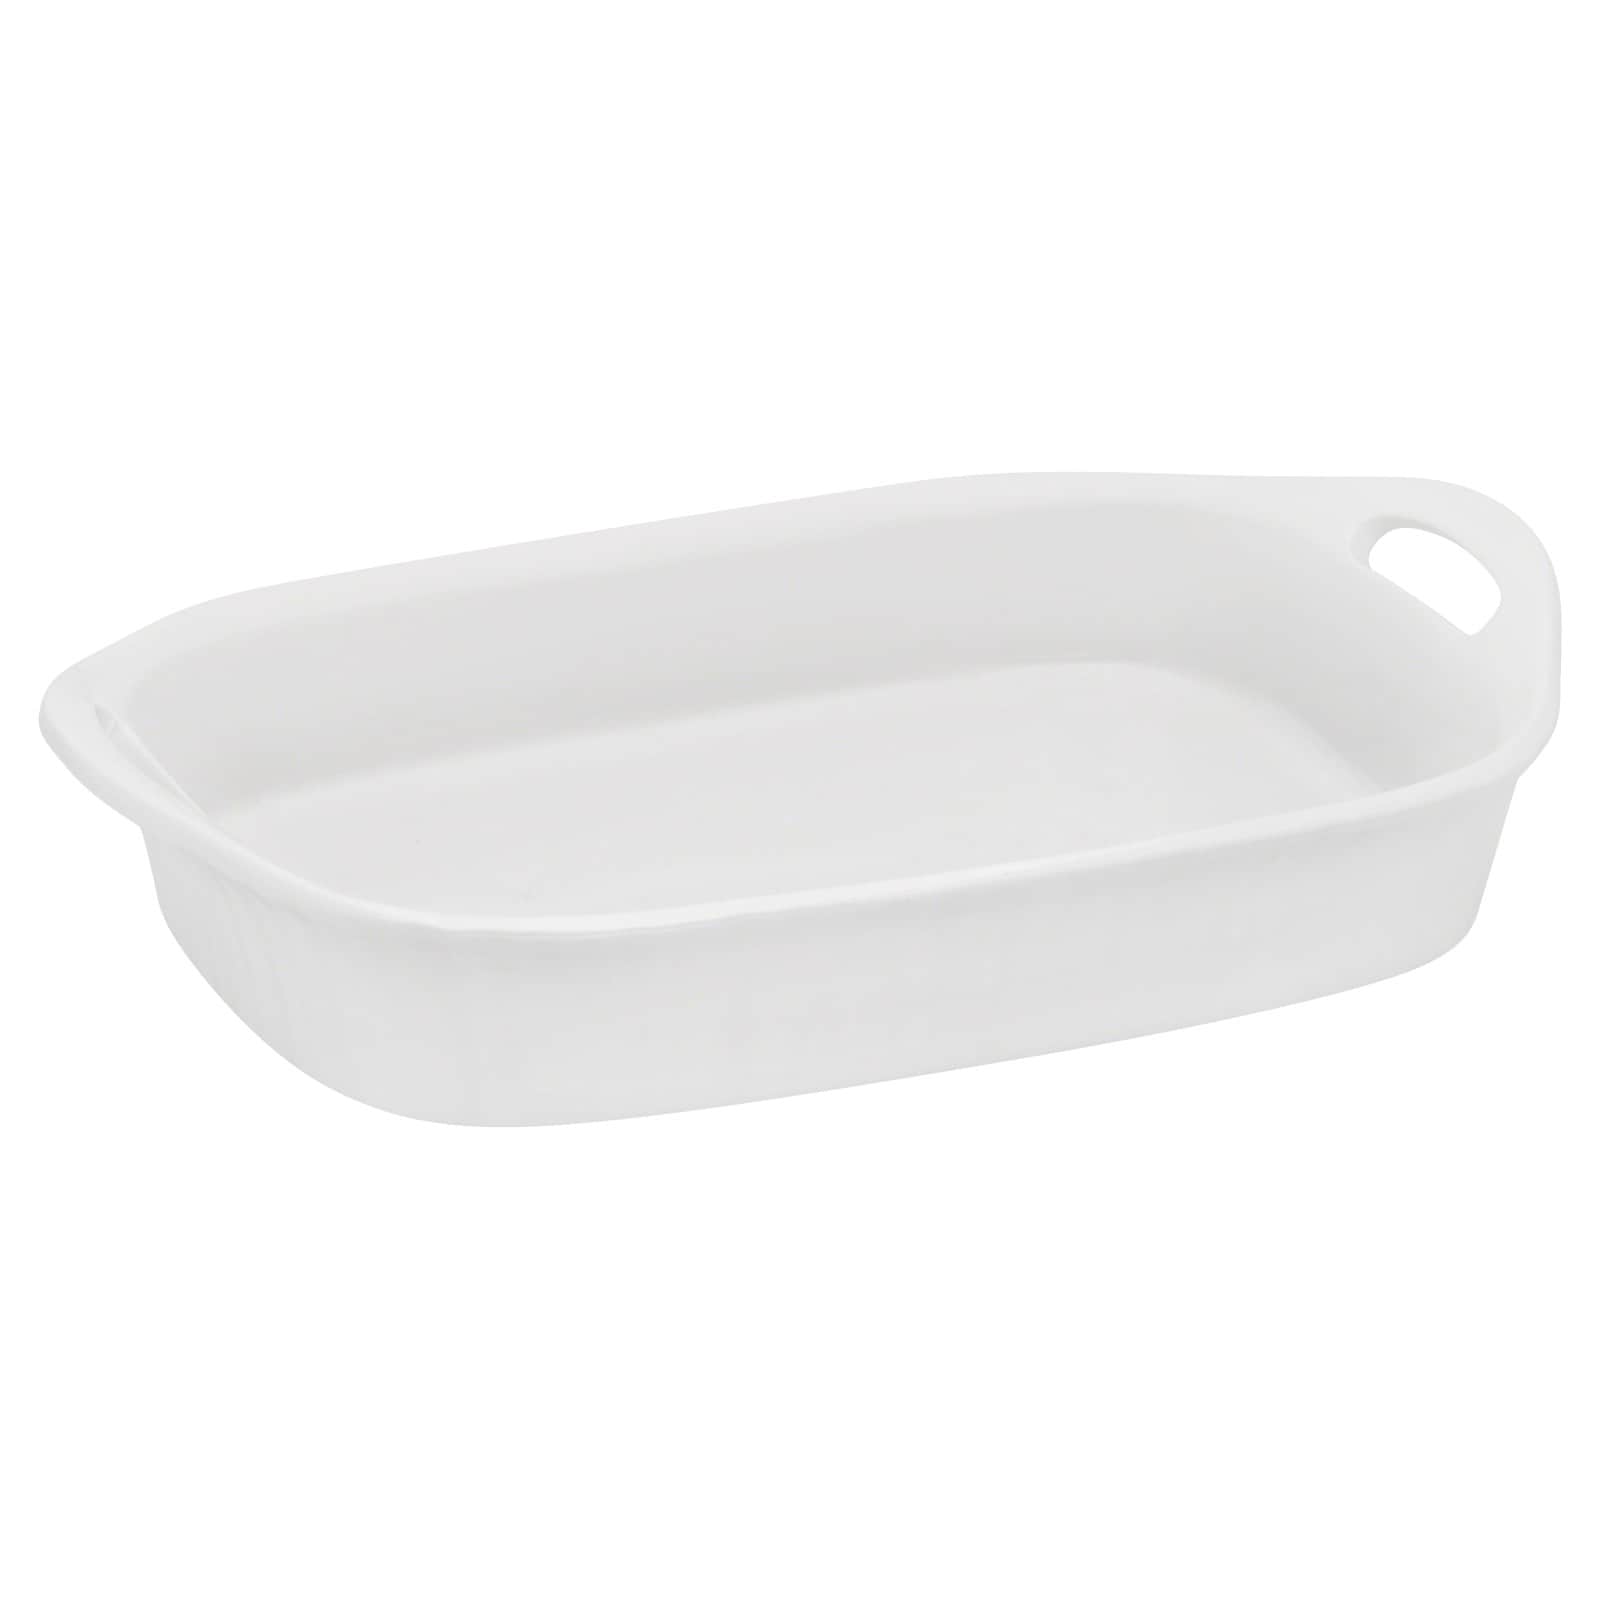 Restaurantware 7 Ounce White Casserole Dishes, 10 Square White Baking Dishes  - Oven Safe, Chip Resistant, White